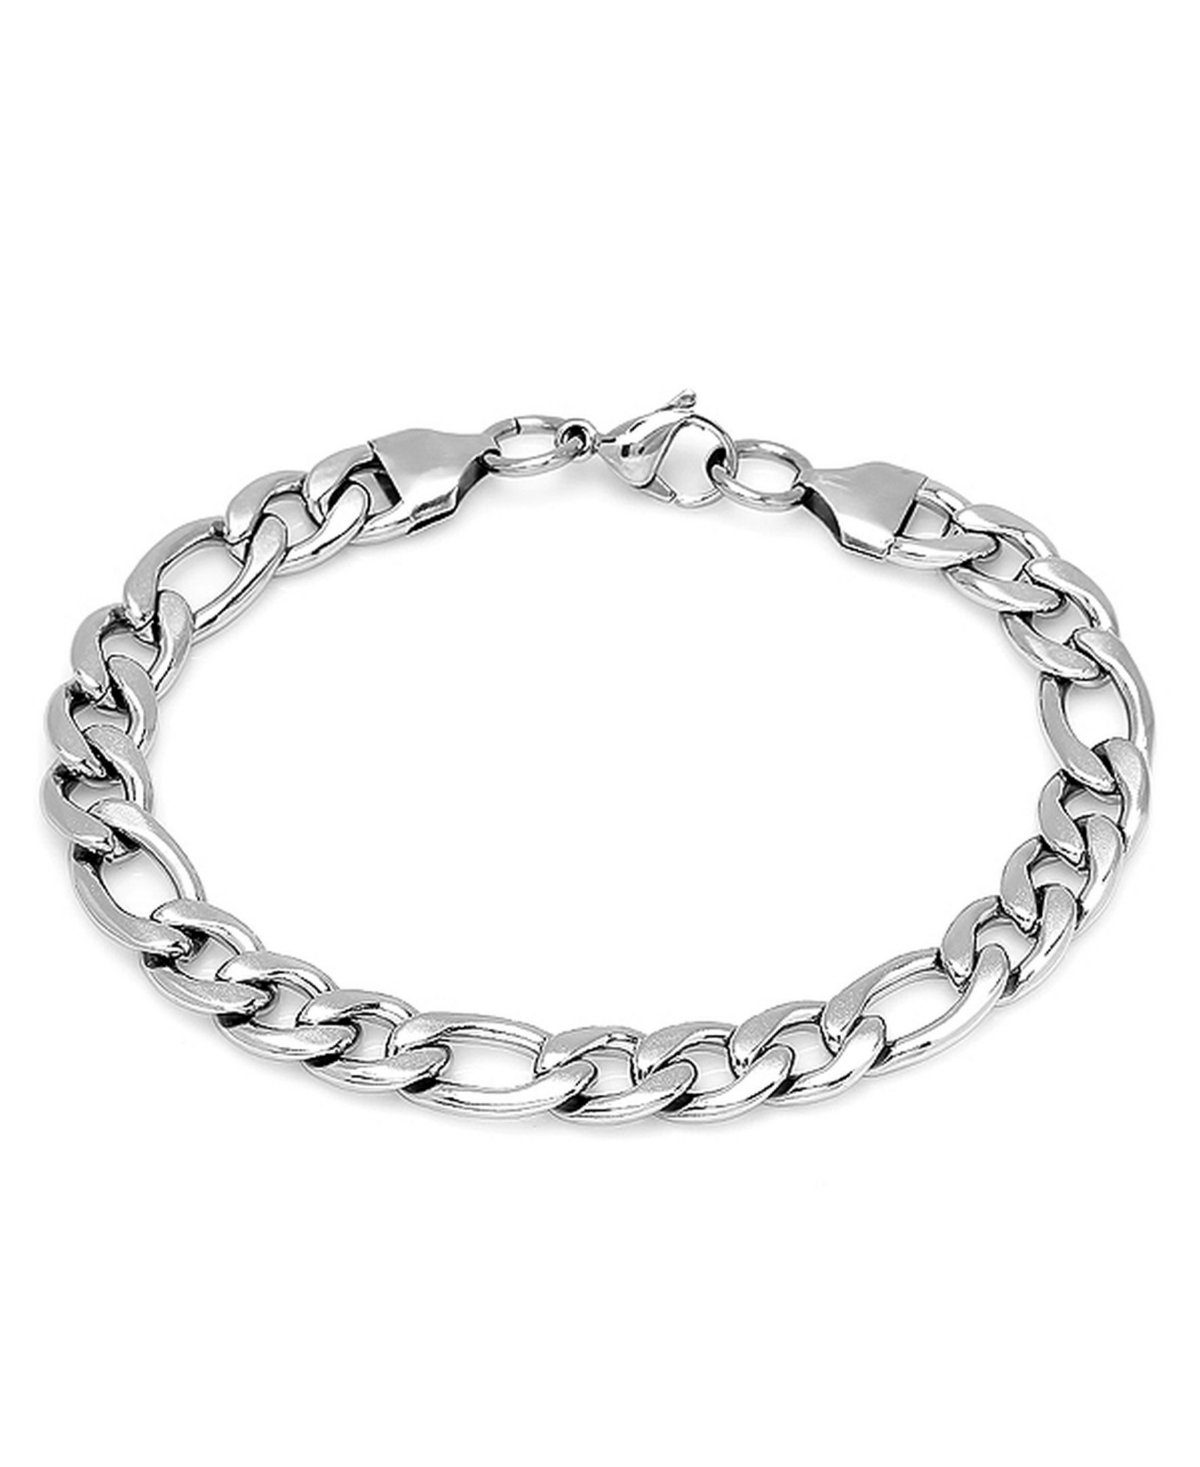 Shop Steeltime Men's Stainless Steel Thick Round Box Link Bracelet In Silver